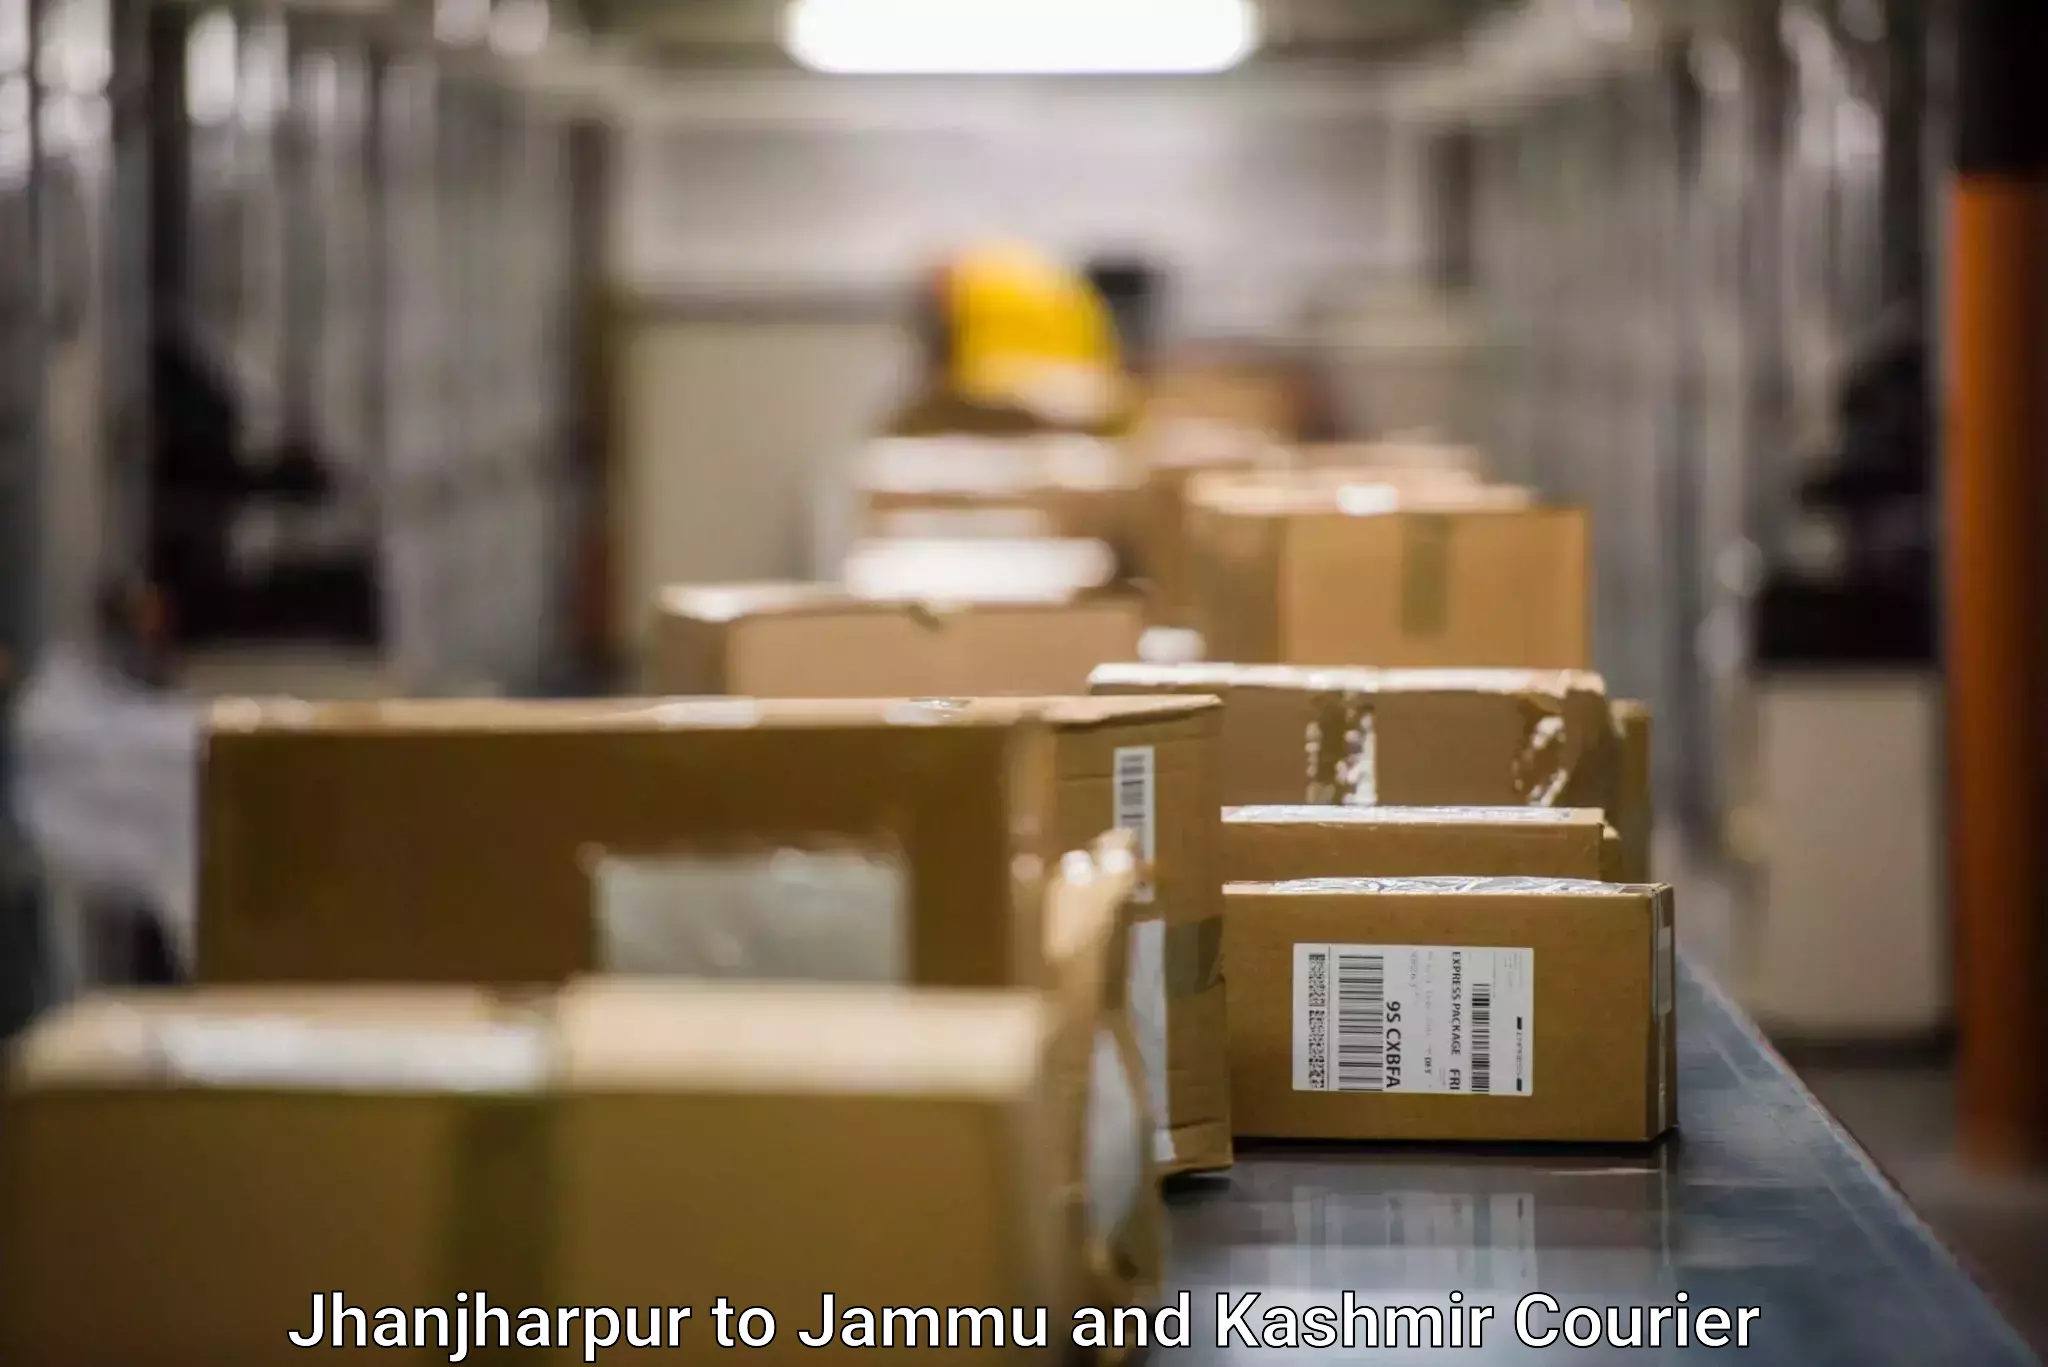 24-hour courier service in Jhanjharpur to Bandipur